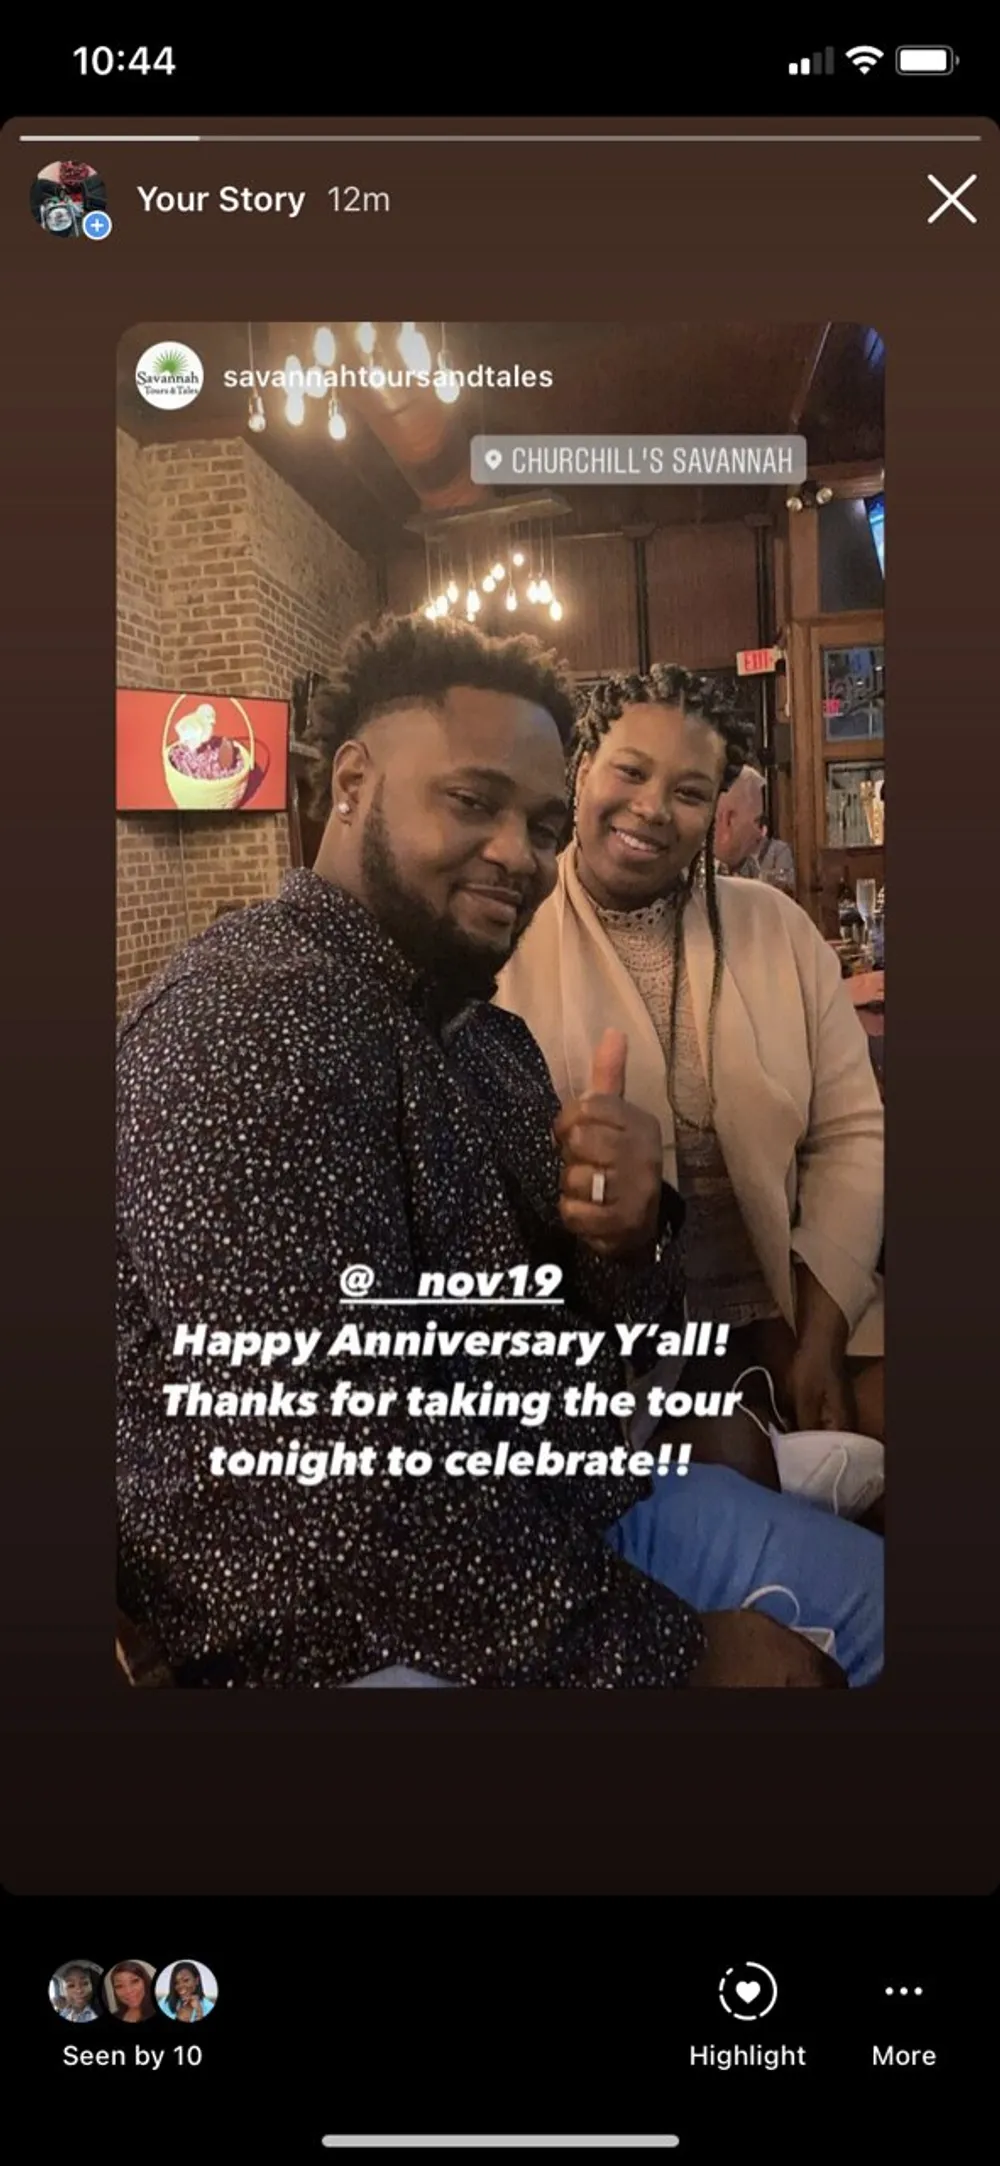 A screenshot of a social media story features two smiling individuals with a caption celebrating their anniversary and thanking them for taking a tour to commemorate the occasion